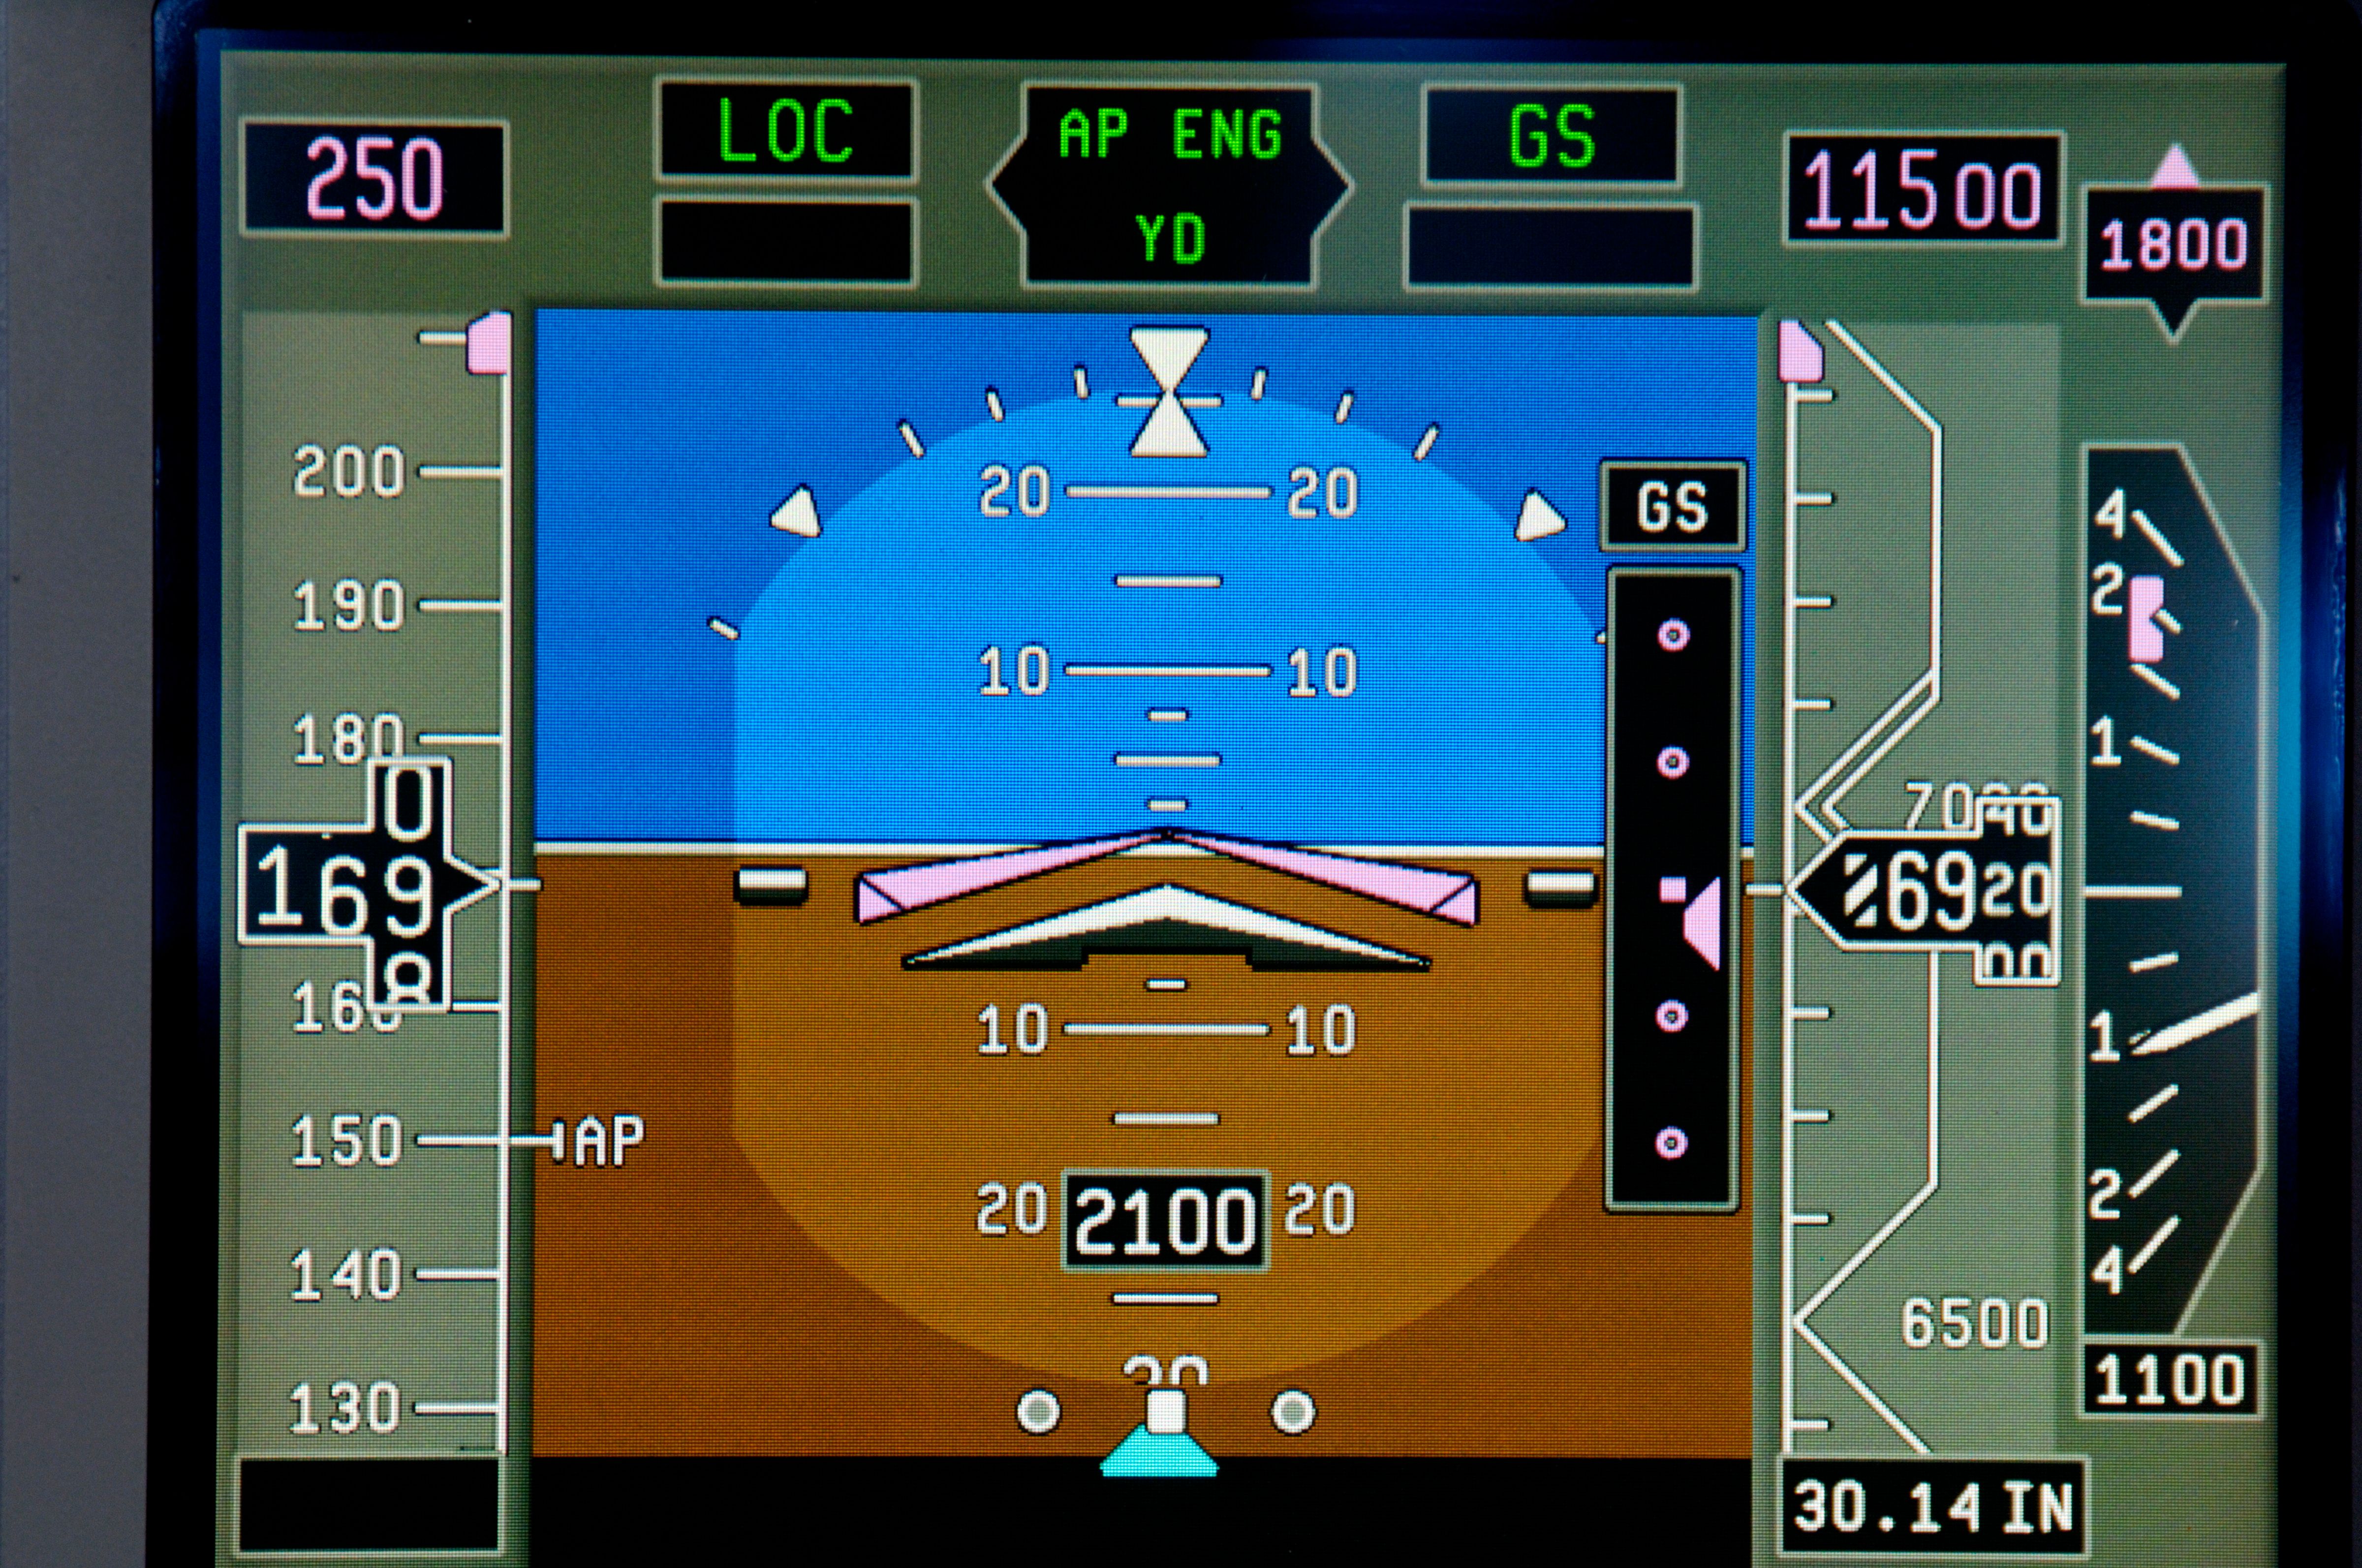 A Primary Flight Display showing 6920 feet on the altimeter with a pressure setting of 30.14 inches of mercury set (right).